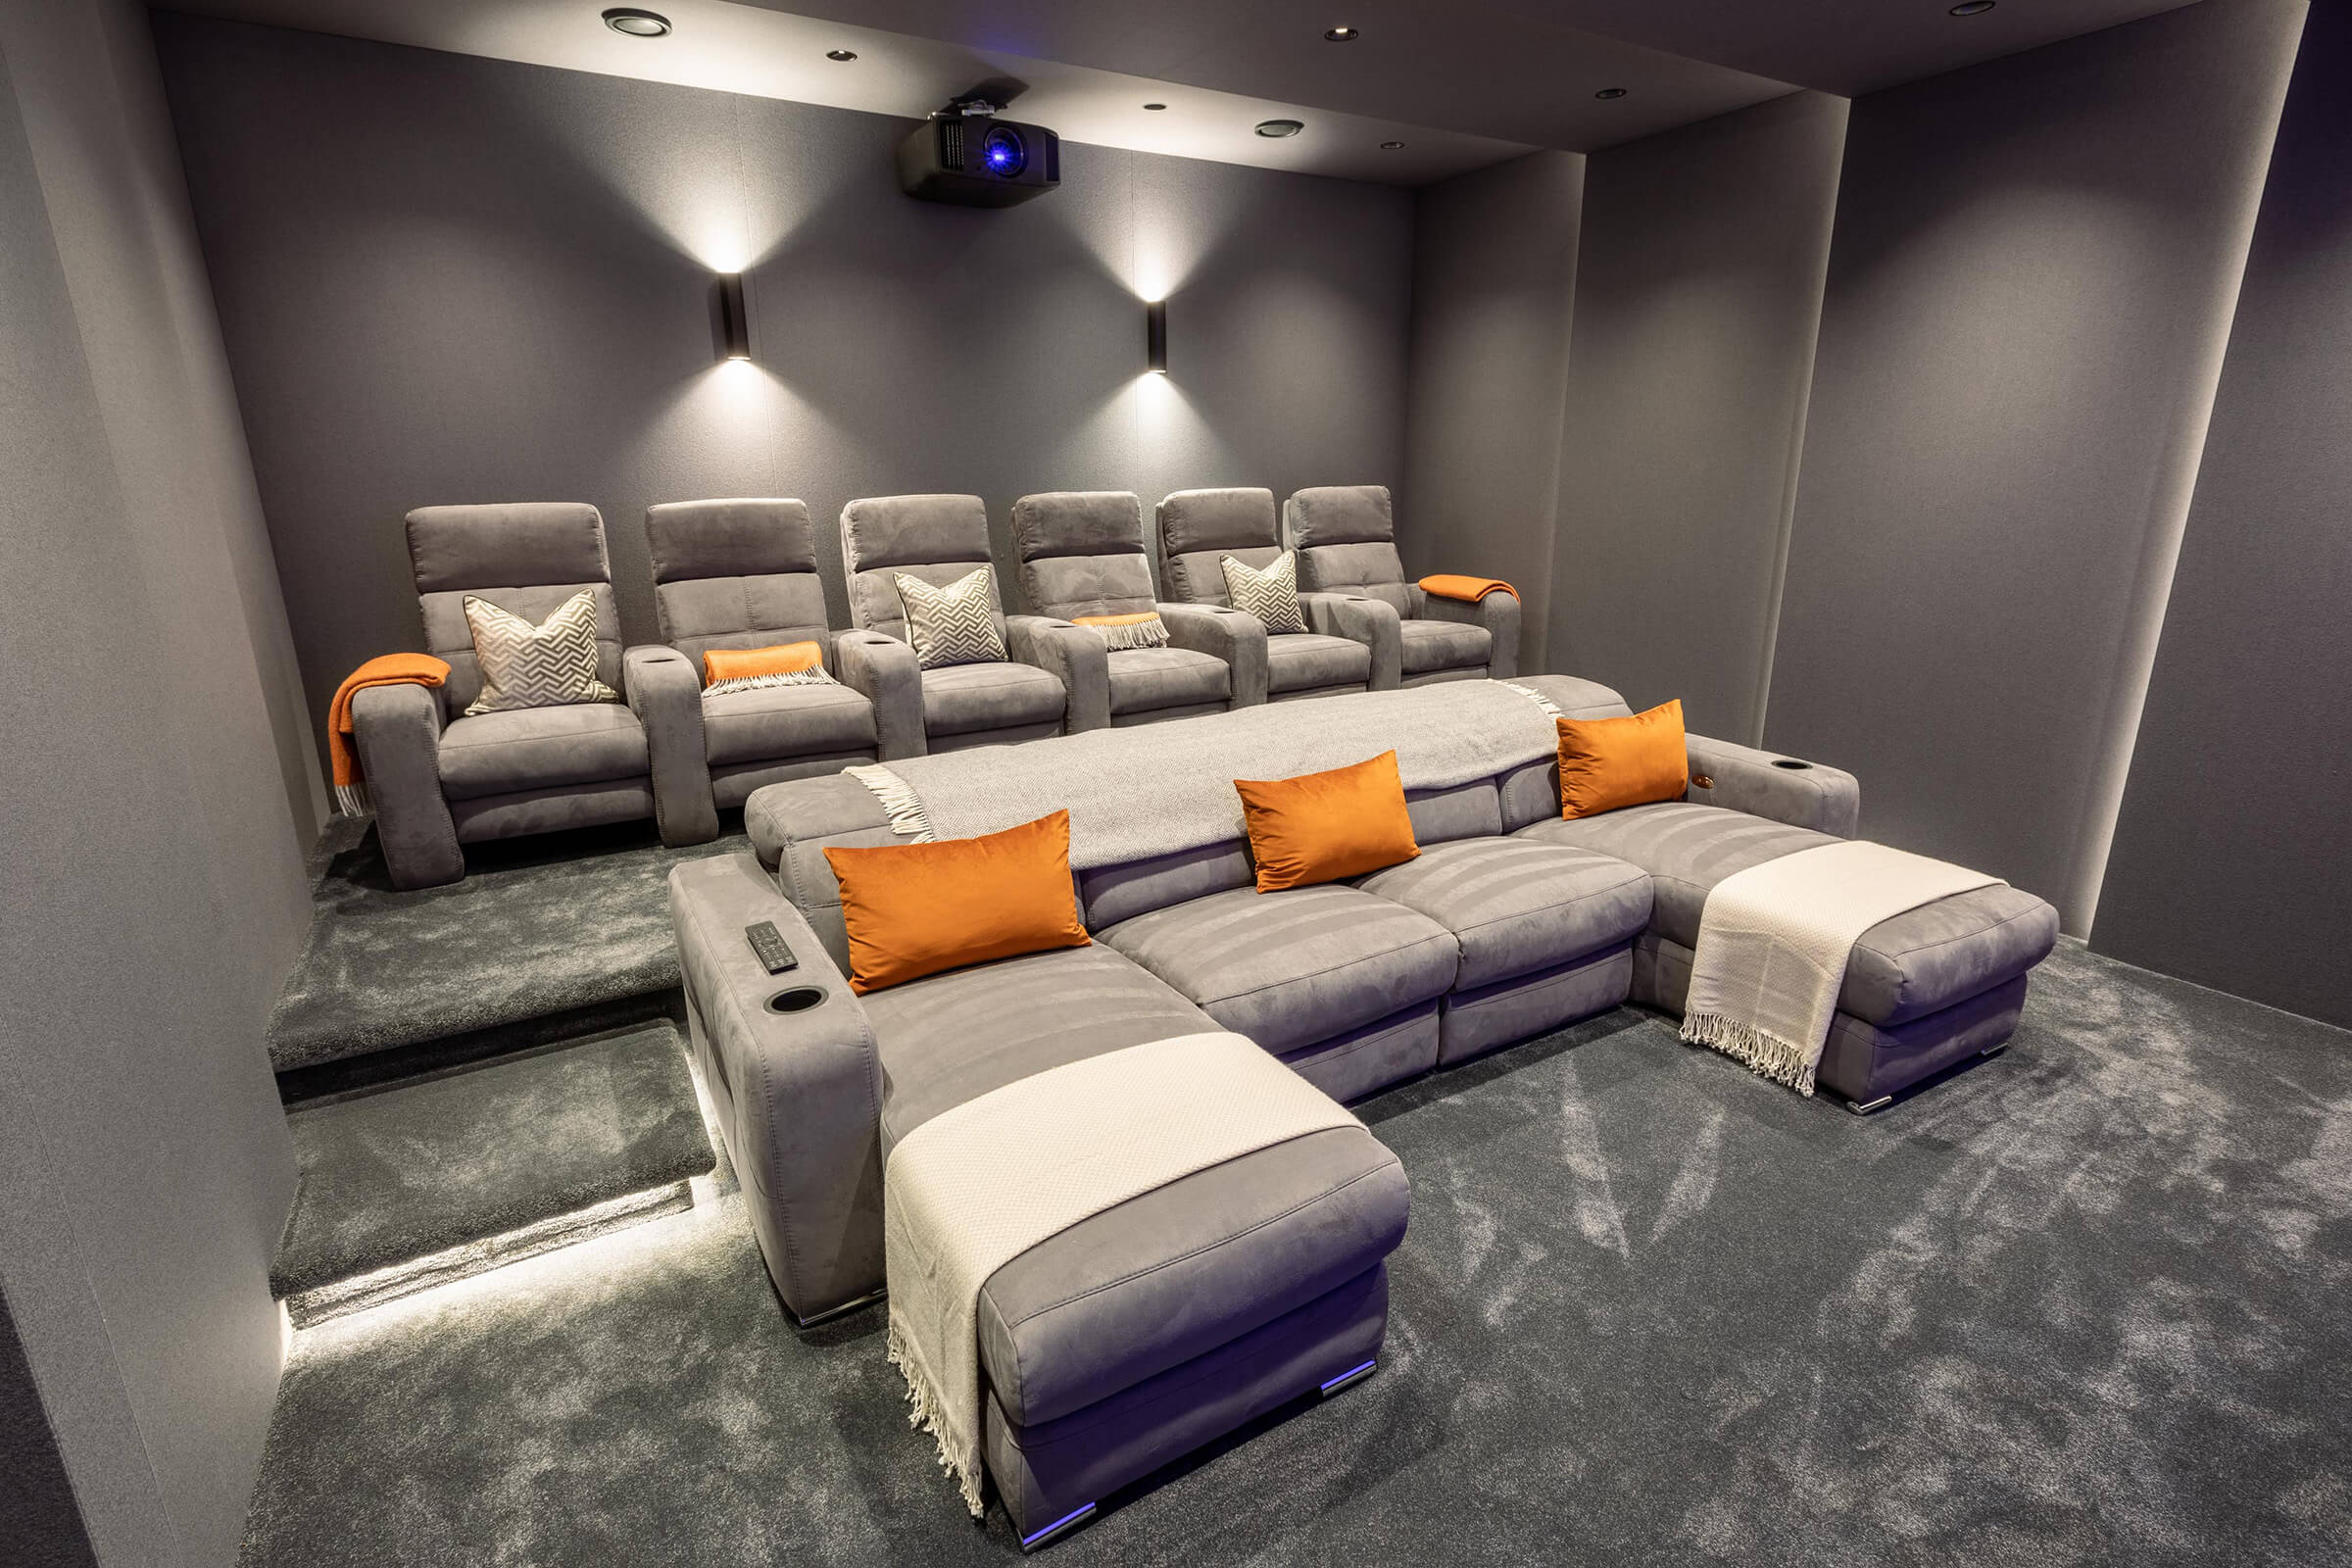 Finding the Perfect Home Cinema Seating: Are You Sitting Comfortably?